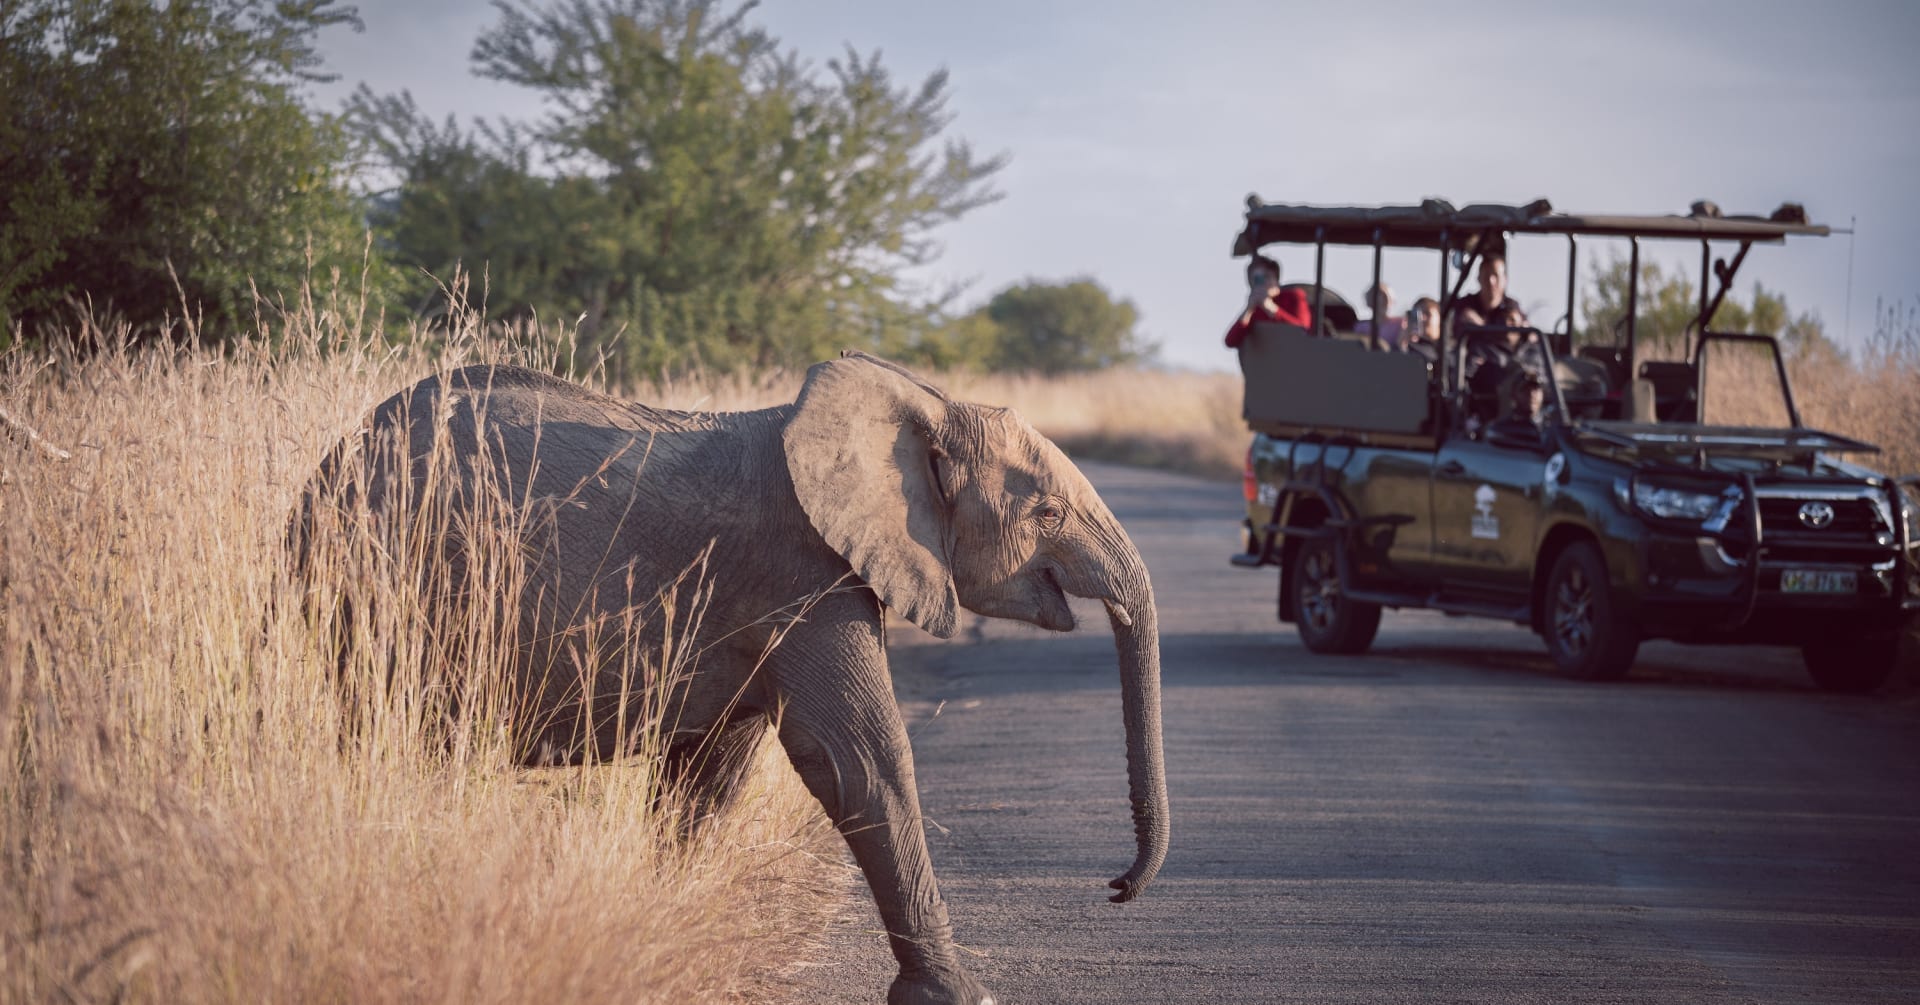 A Guide to Safari Safety in Africa